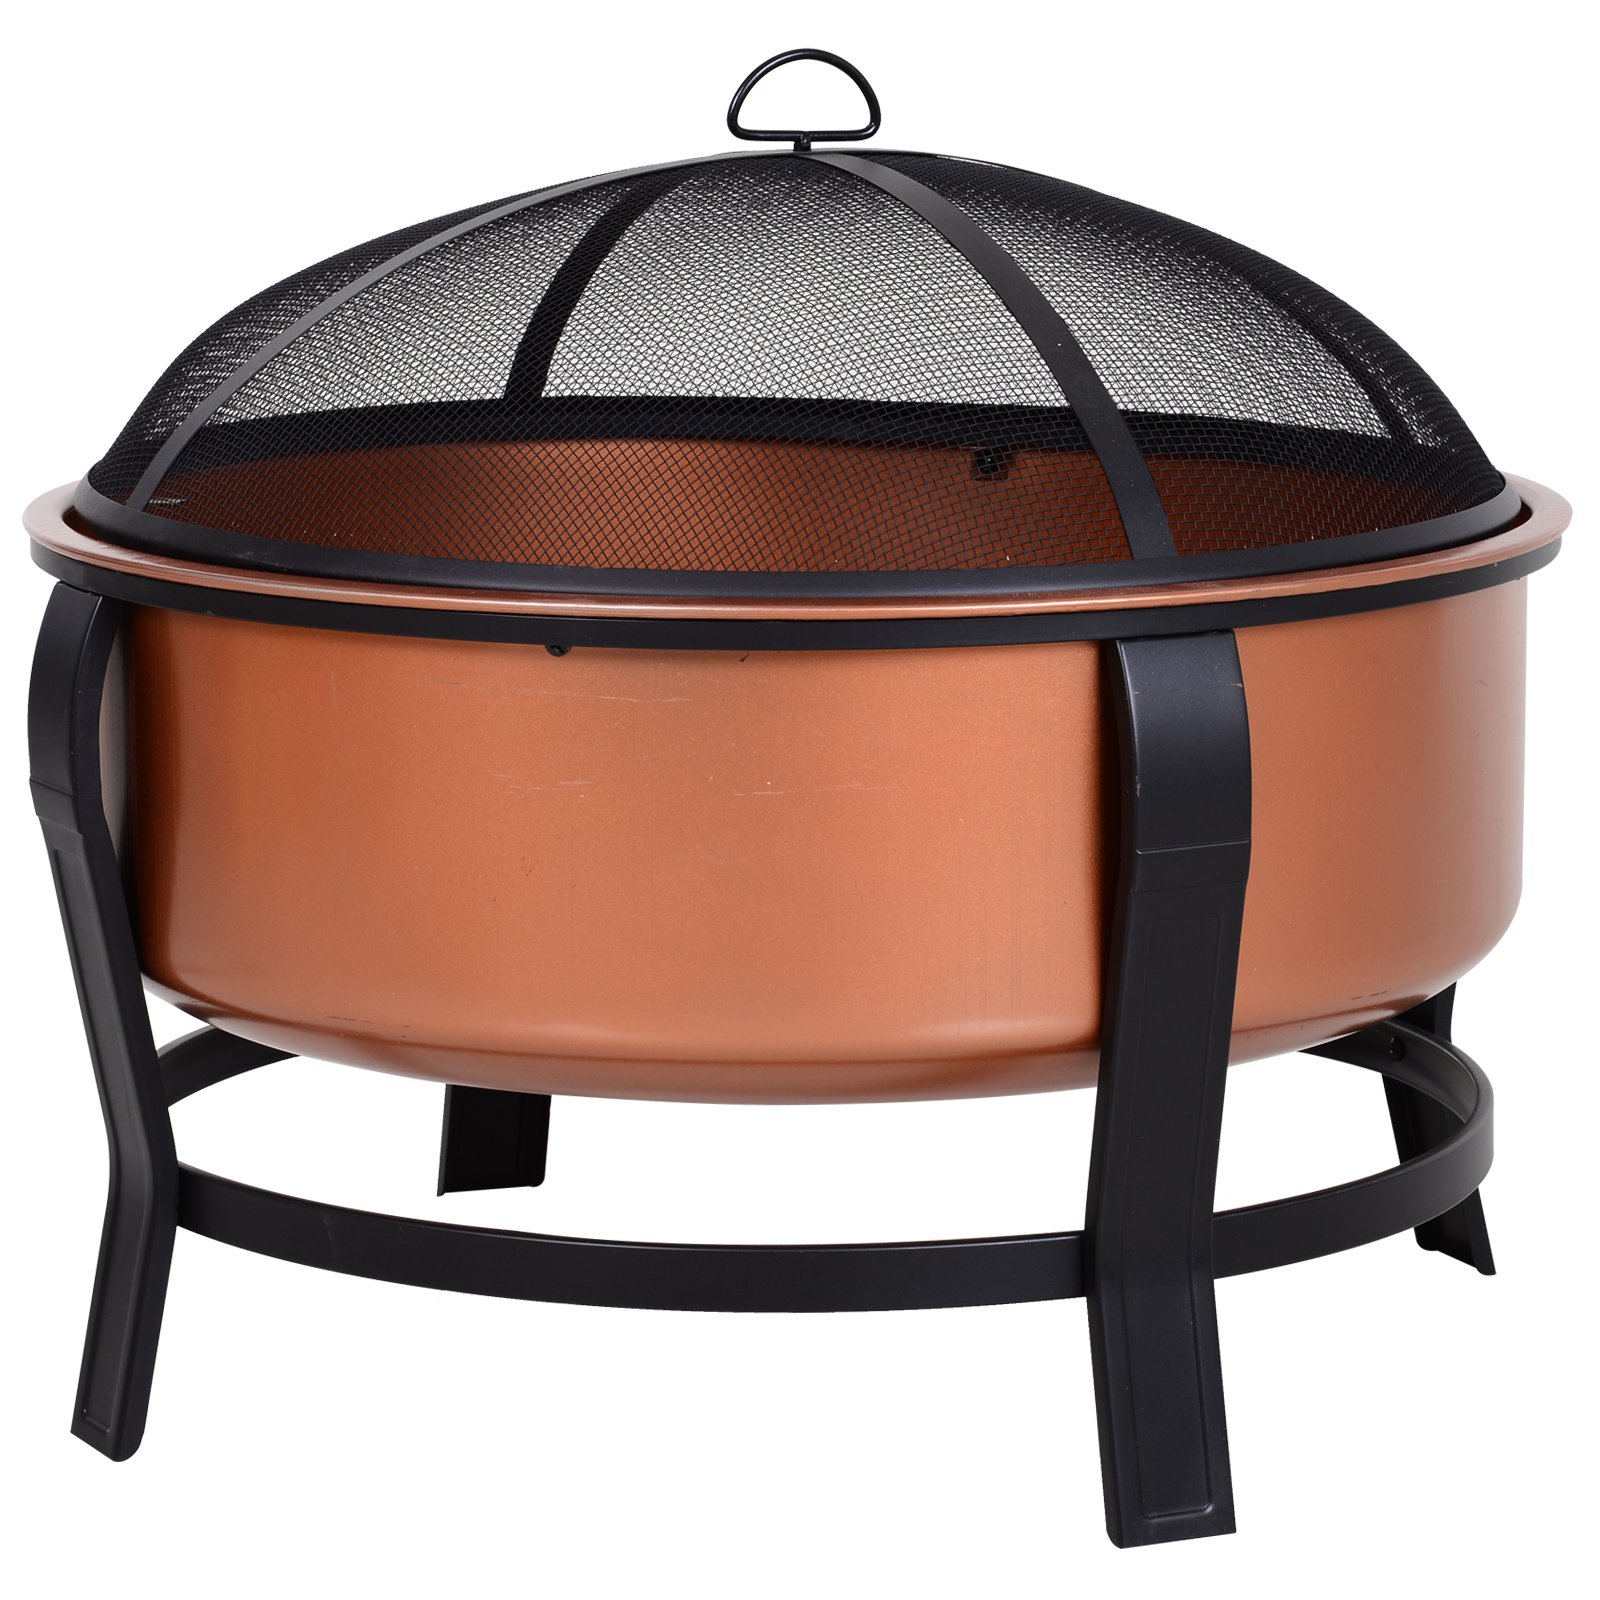 Copper-Colored Round Basin Wood Fire Pit Bowl with Organic Black Base, a Wood Poker & Mesh Screen for Embers